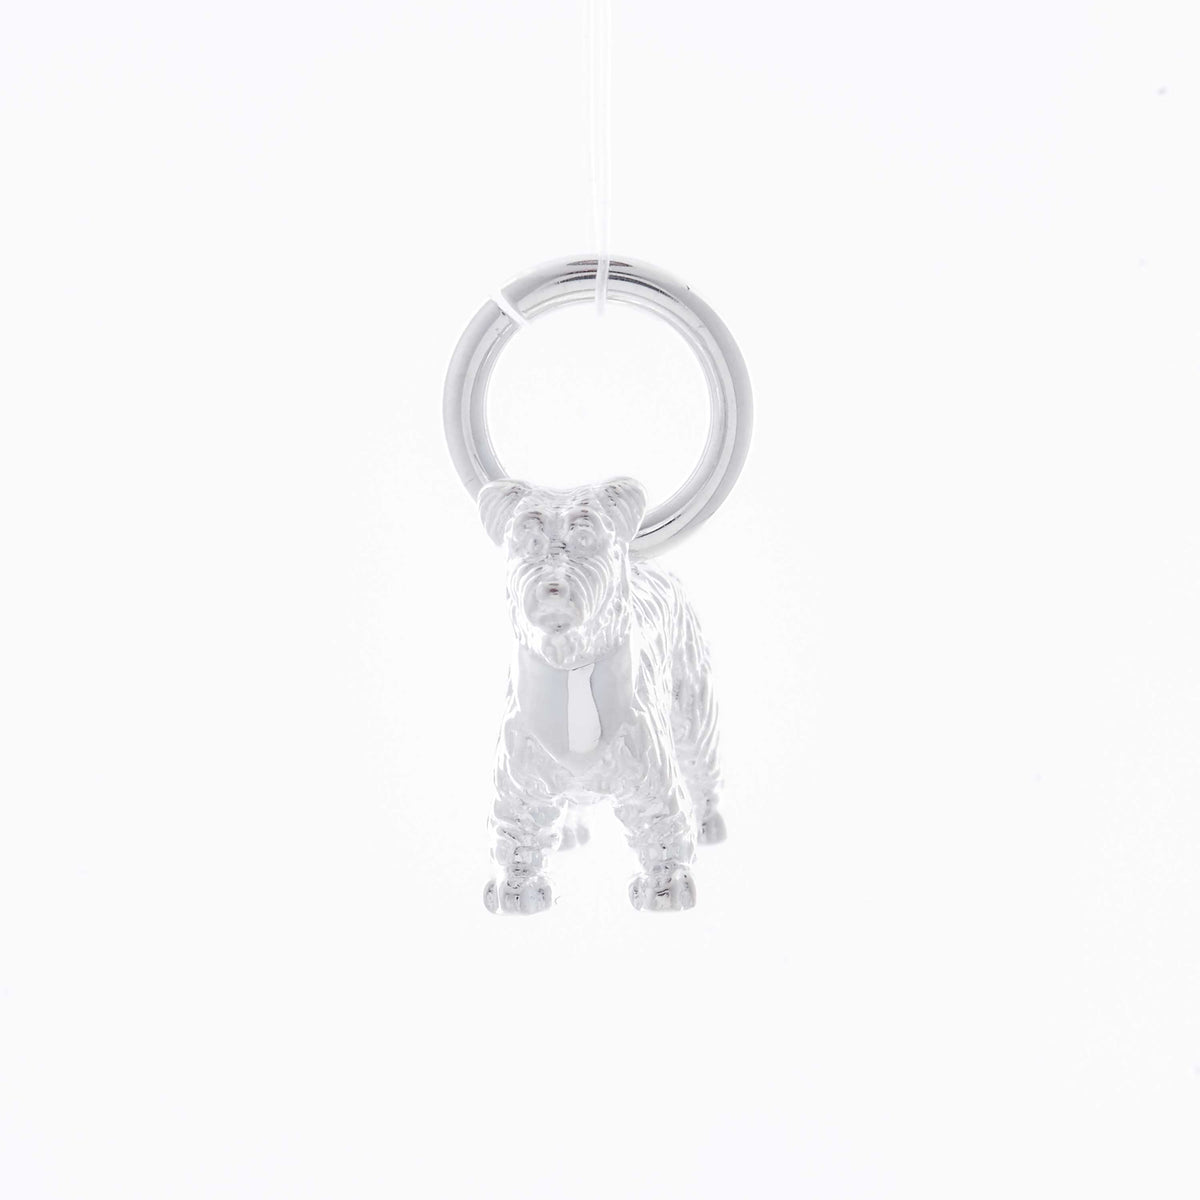 Miniature Schnauzer silver charm necklace engraved gift for pet loss from the dog Scarlett Jewellery UK